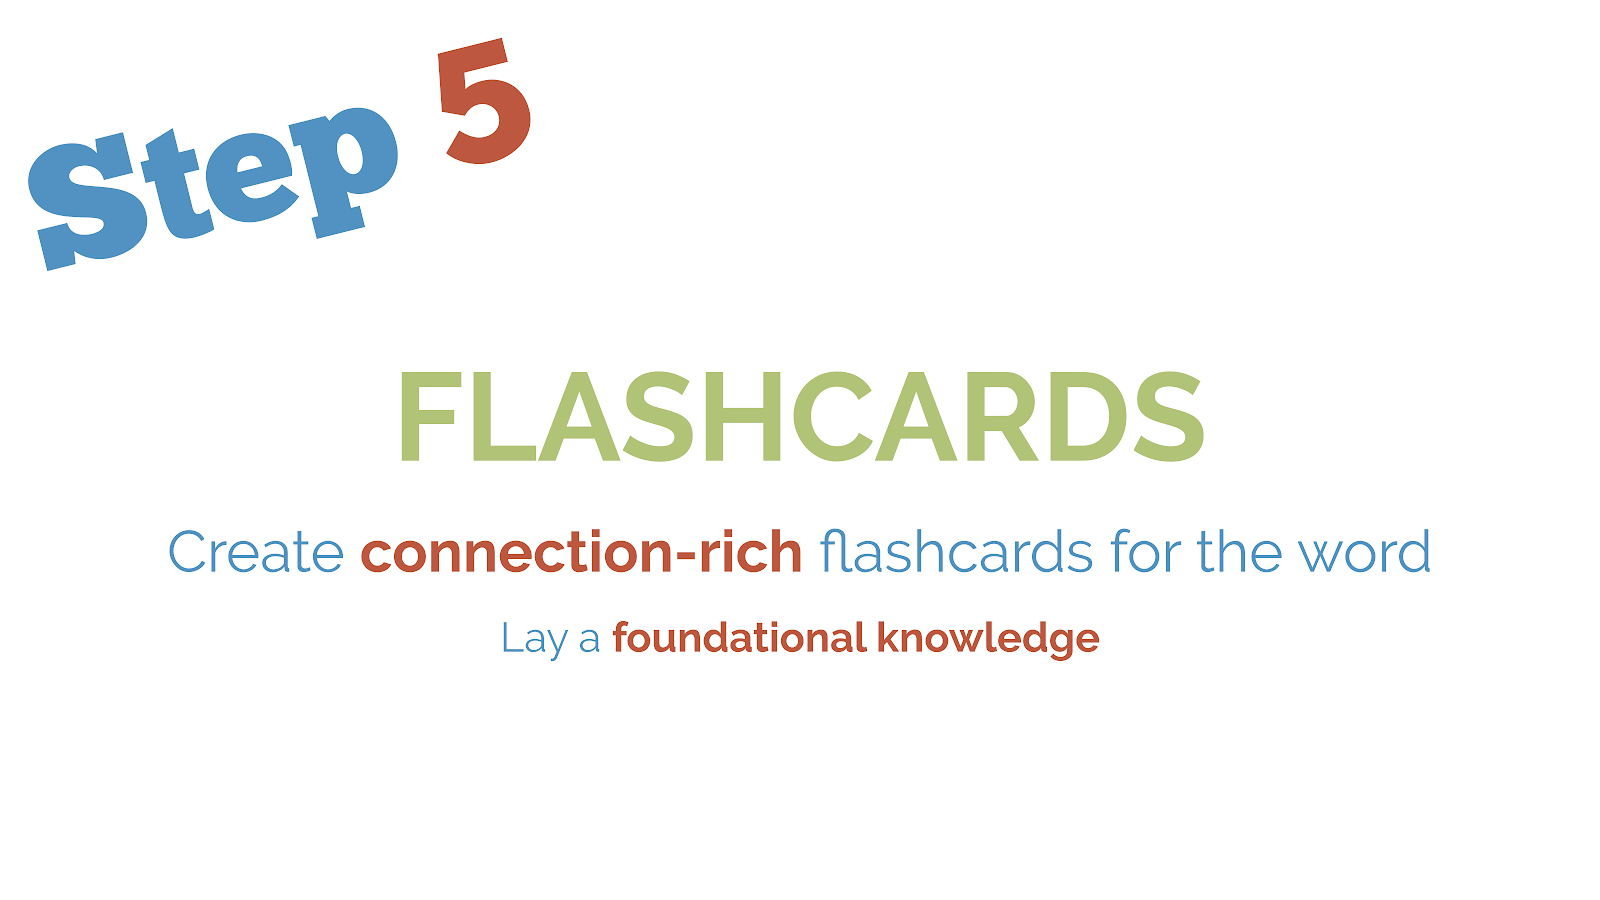 Step 5 to Learning Chinese words: Flashcards